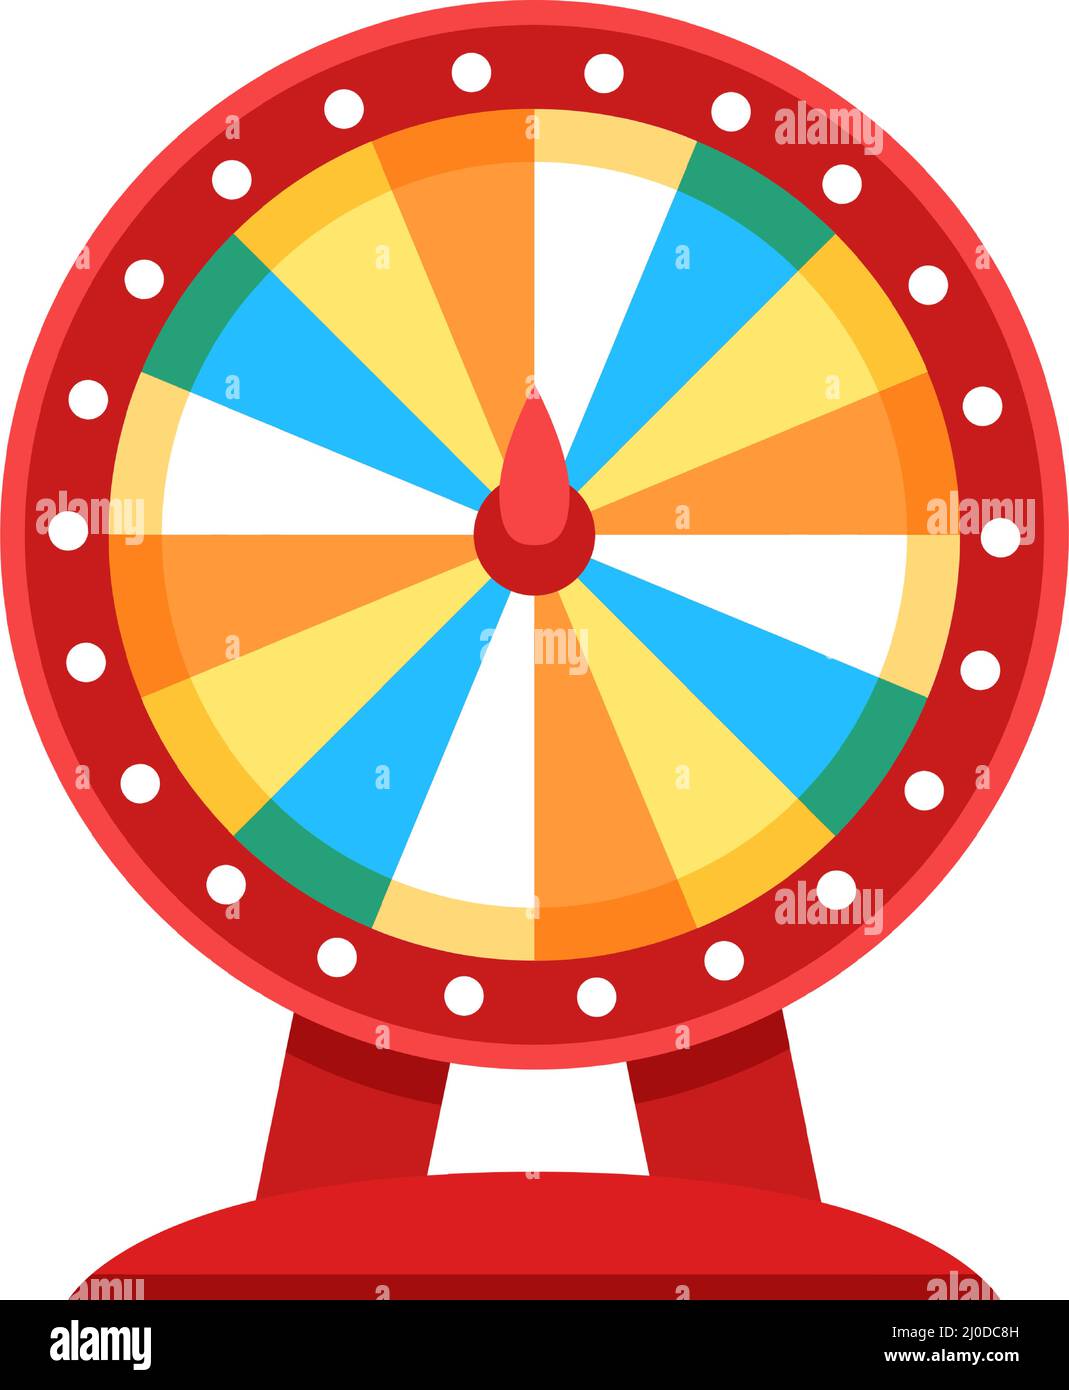 Spin-to-Win Prize Wheel 752370 | Fun Motivational Gifts